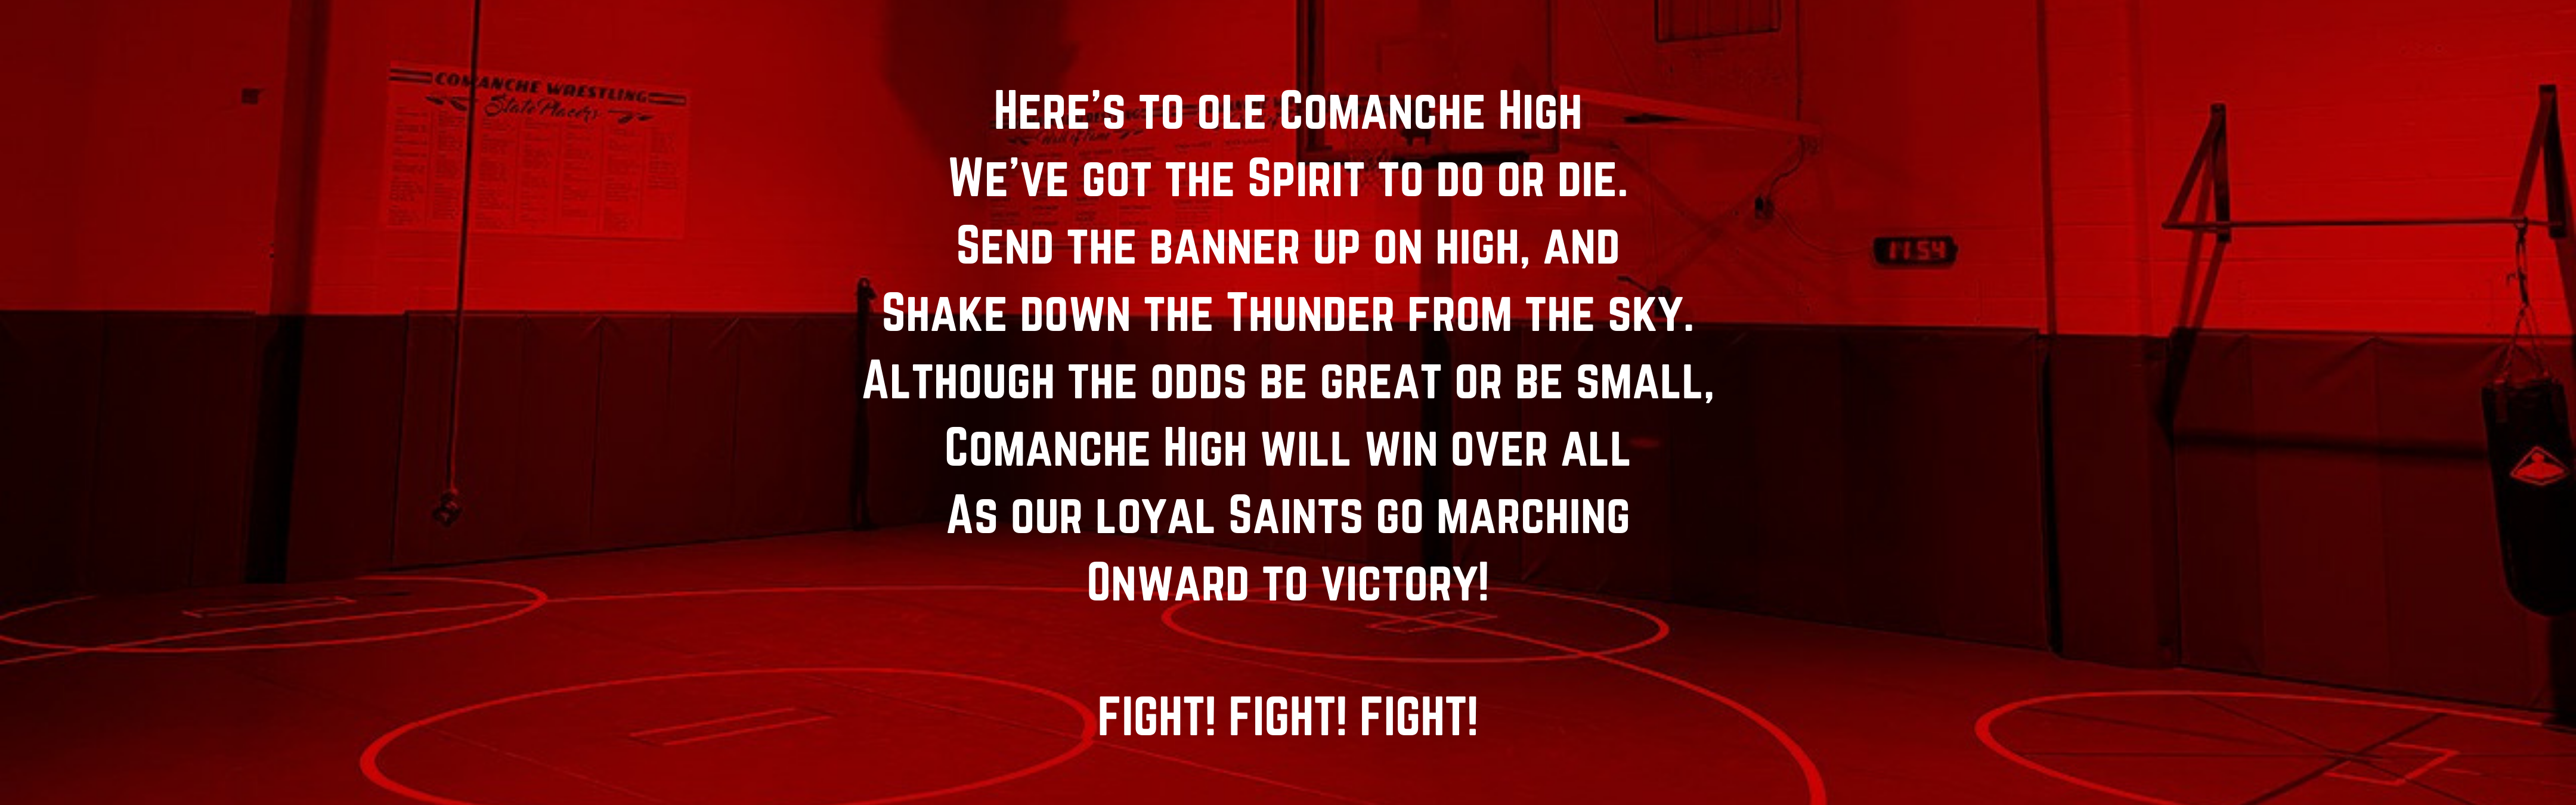 Here's to ole Comanche High We've got the Spirit to do or die. Send the banner up on high, and Shake down the Thunder from the sky. Although the odds be great or be small, Comanche High will win over all As our loyal Saints go marching Onward to victory!  FIGHT!  FIGHT!  FIGHT!